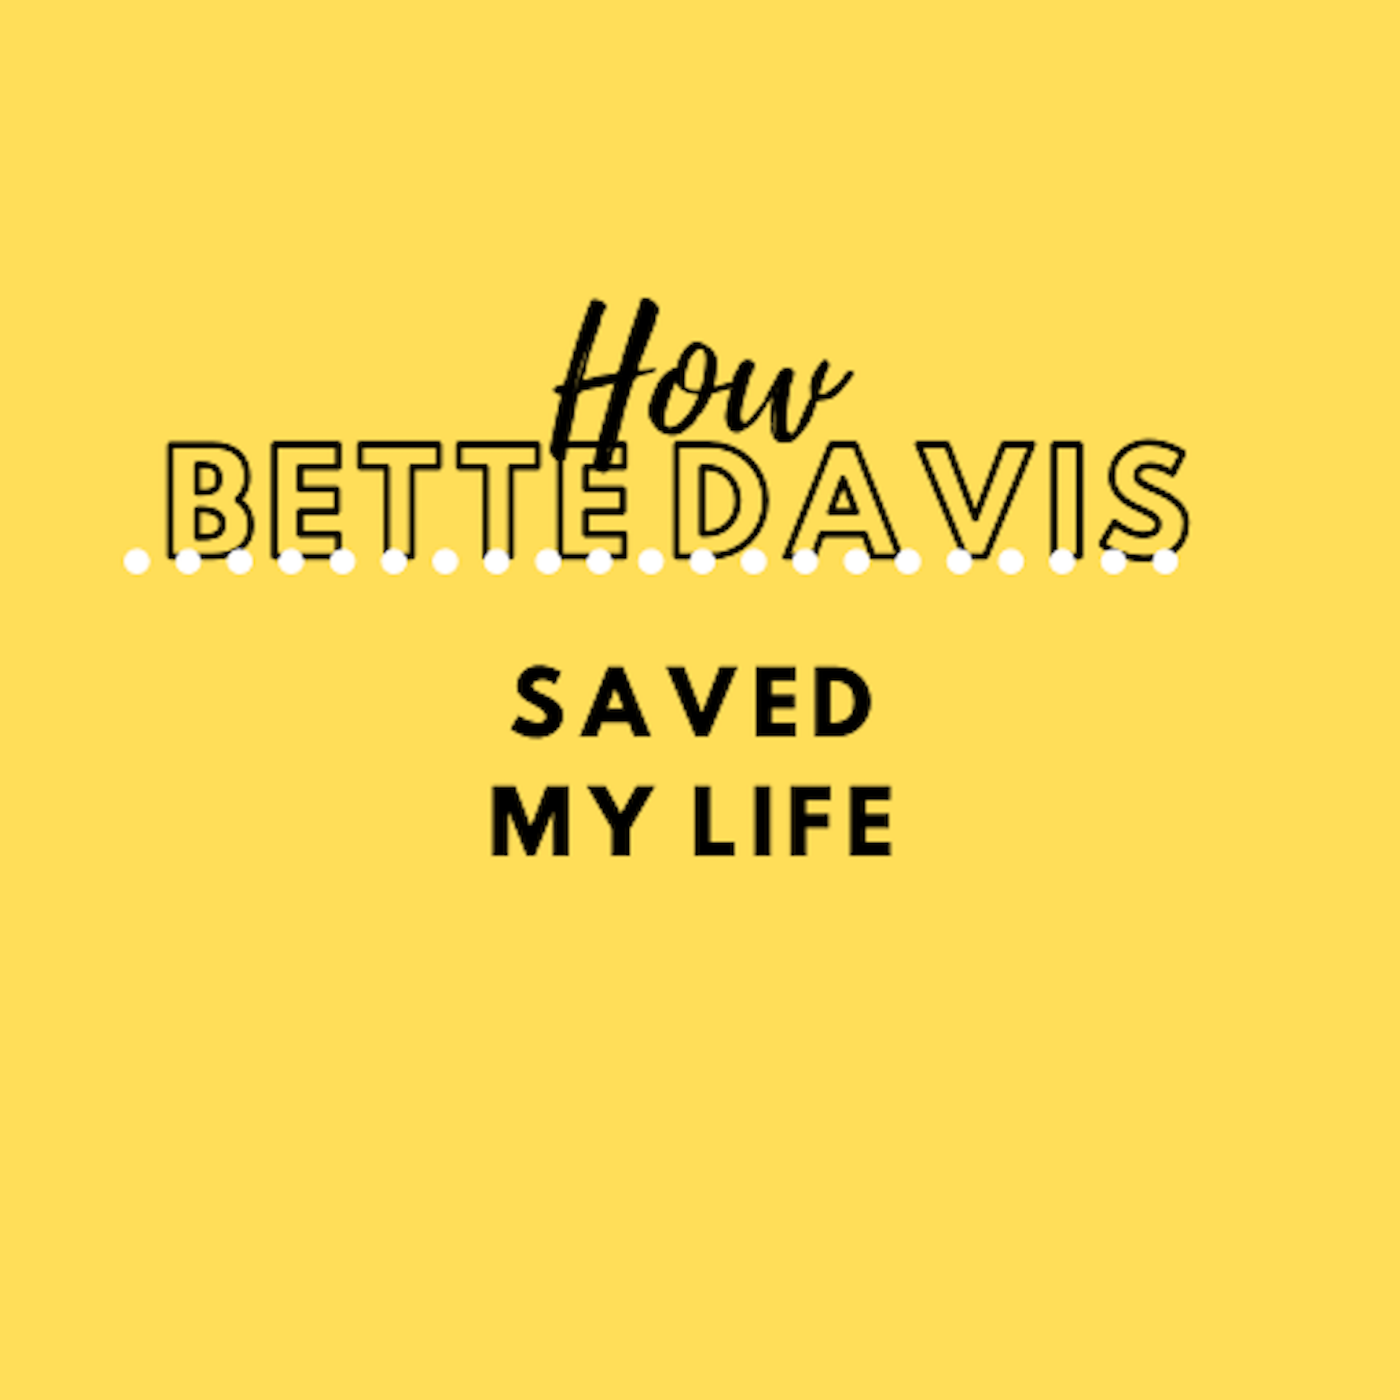 A Very Special How Bette Davis Saved My Life:  "Blossoms In The Dust"